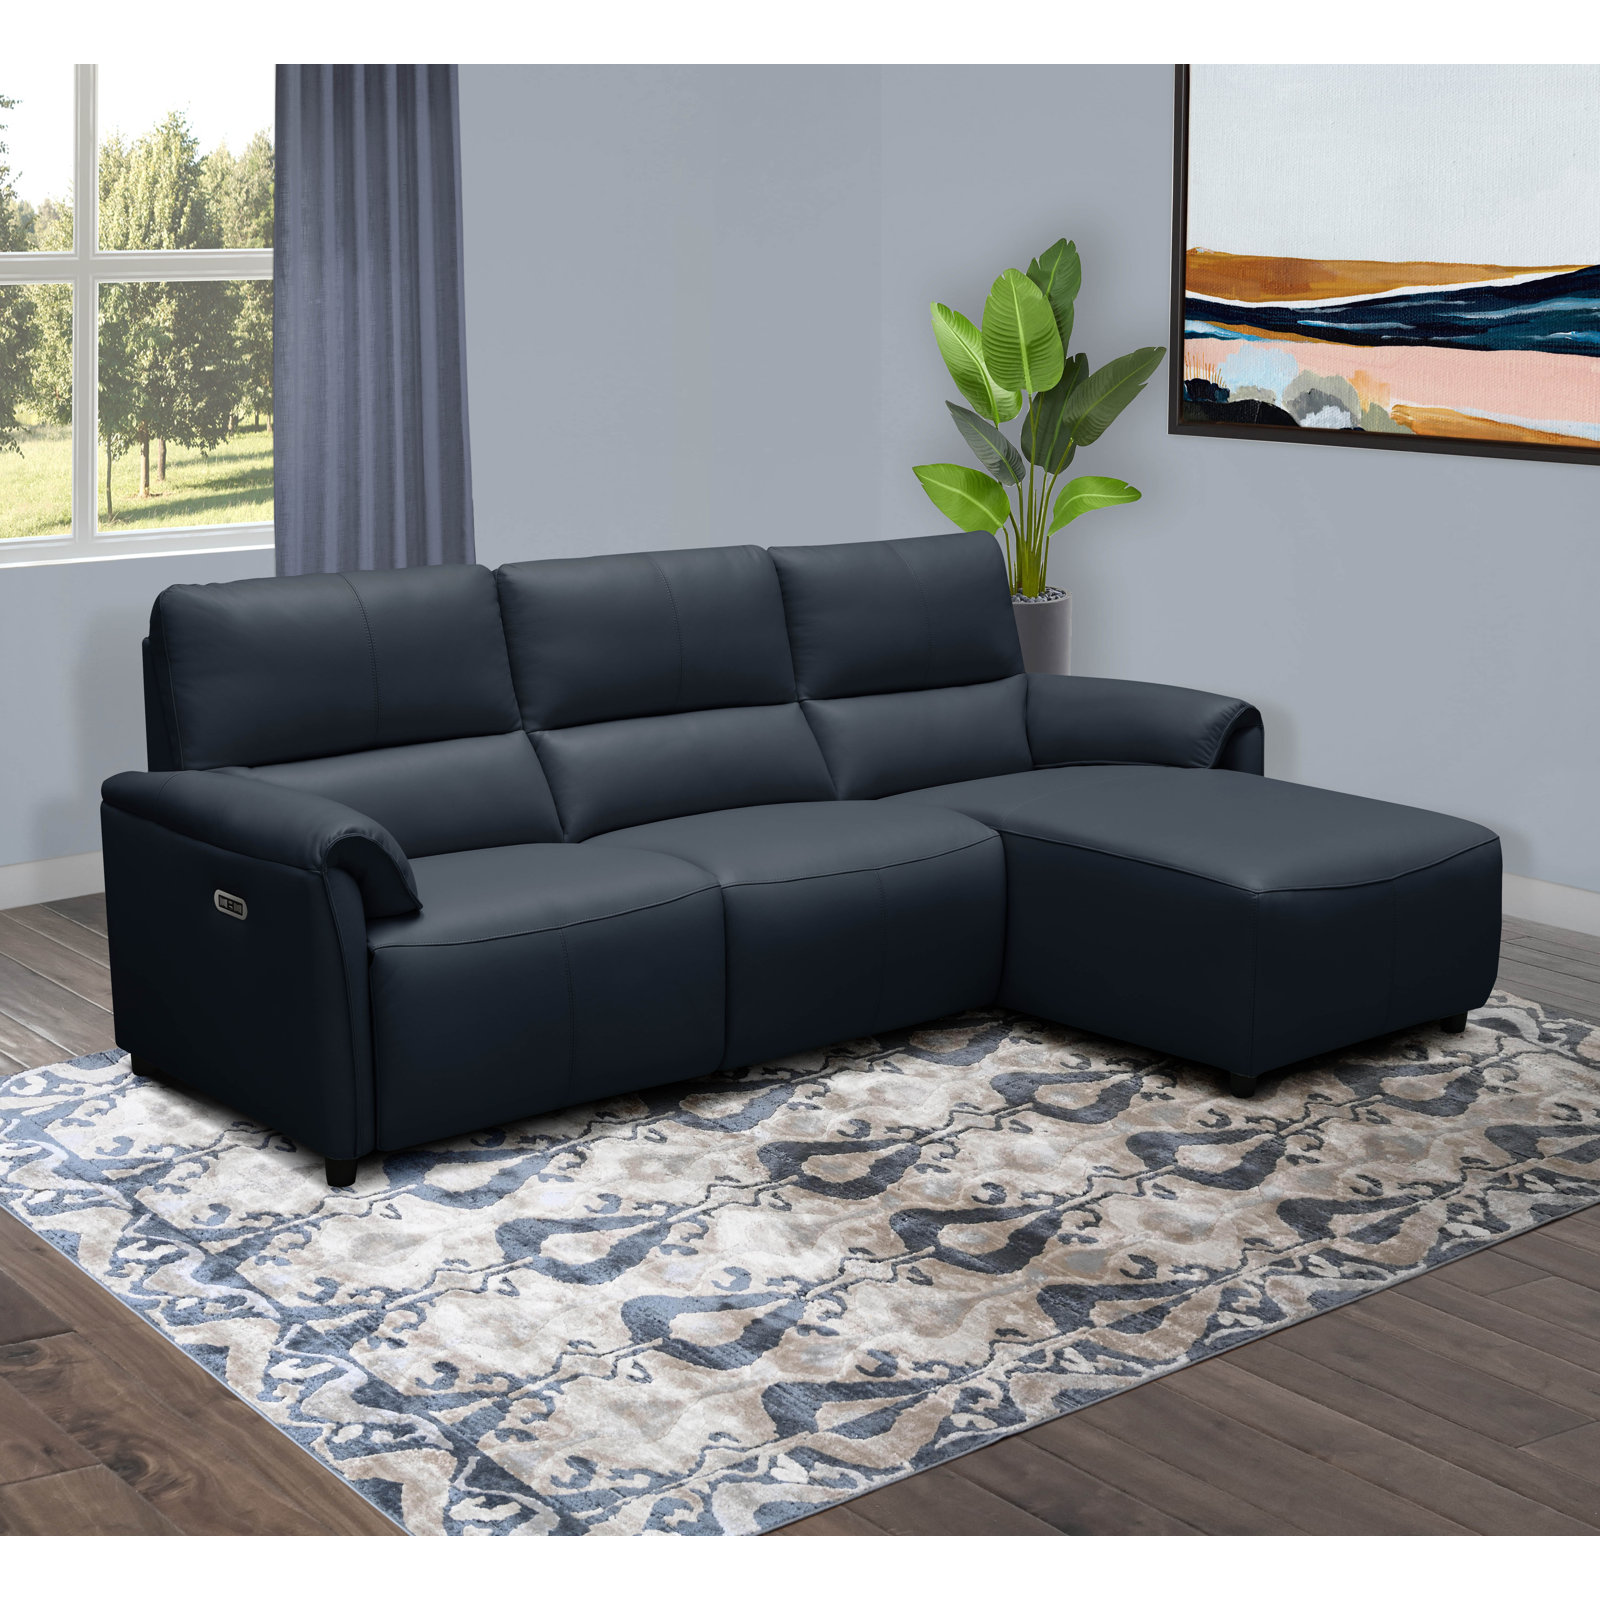 Latitude Run Jessica Top Grain Leather Power Reclining Chaise Sectional with Power Headrests